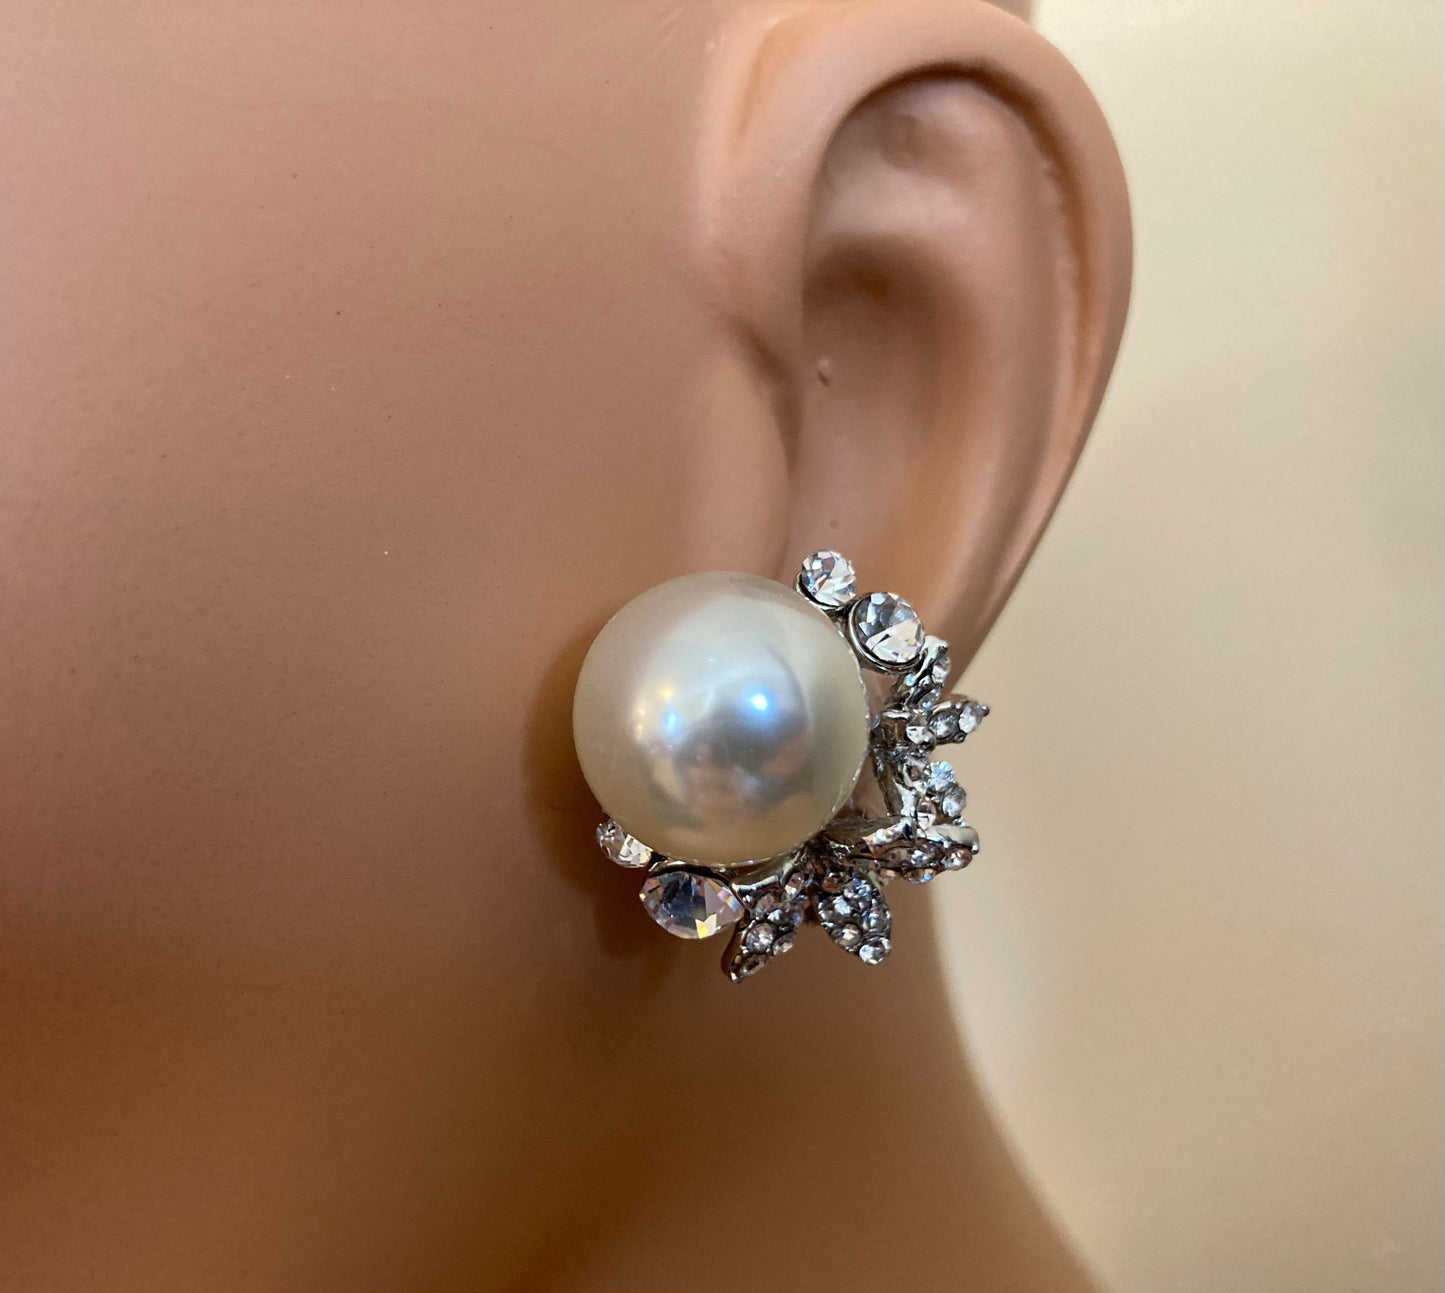 Pearl Clip on Earrings Bridal Earrings with Rhinestone and clipon back in silver with White Pearls classic design wedding earrings clip ons